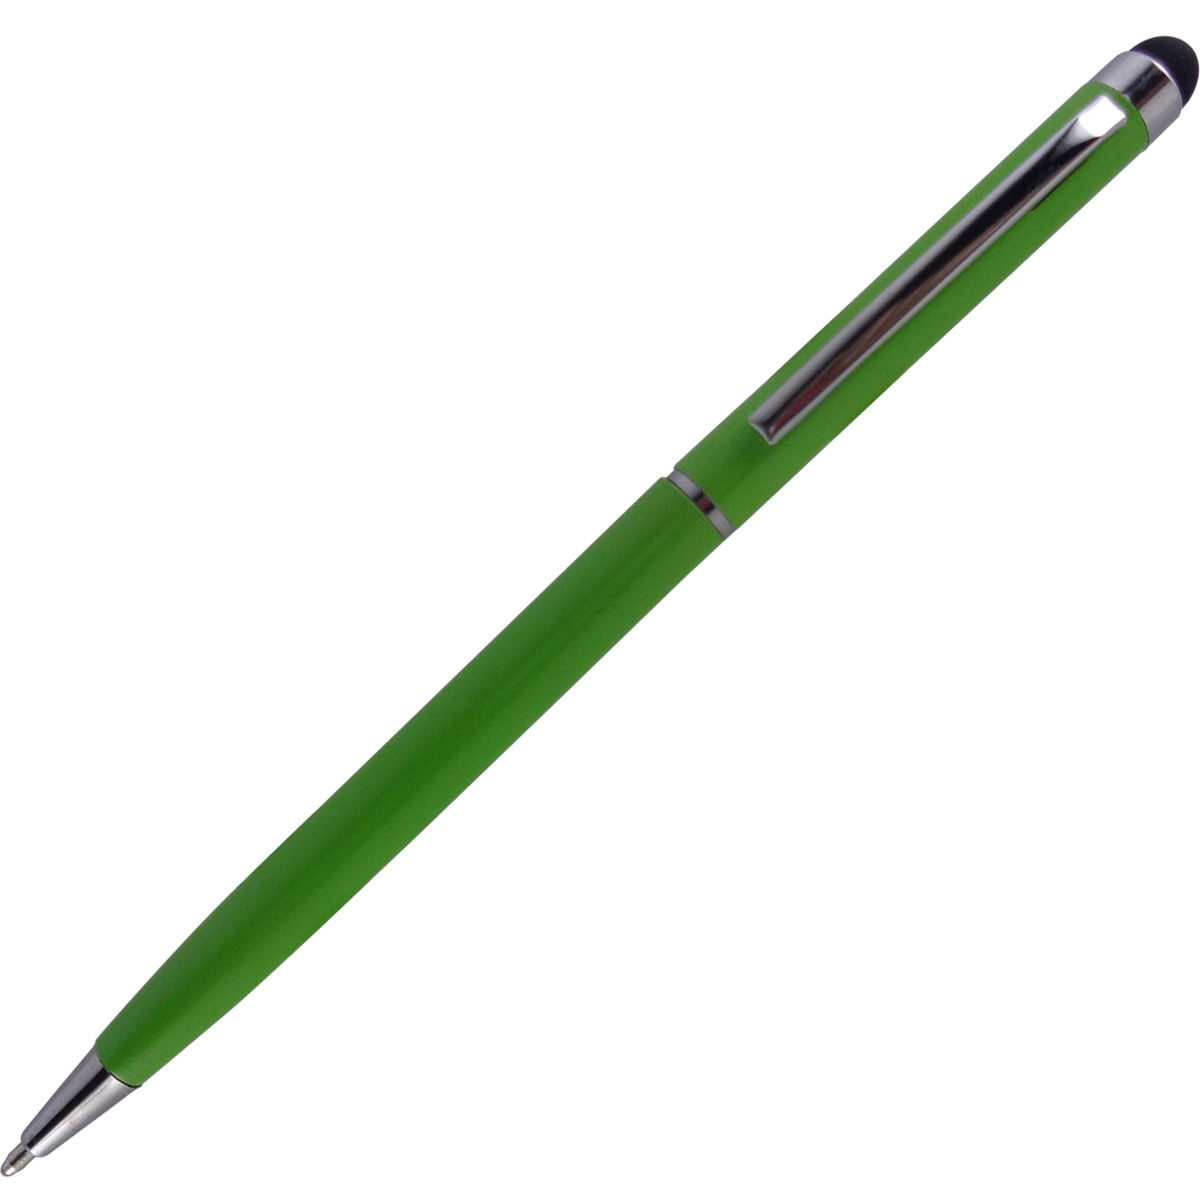 Penhouse.in Model:13786 slim green color body with silver clip medium Tip twist type stylus Ball pen